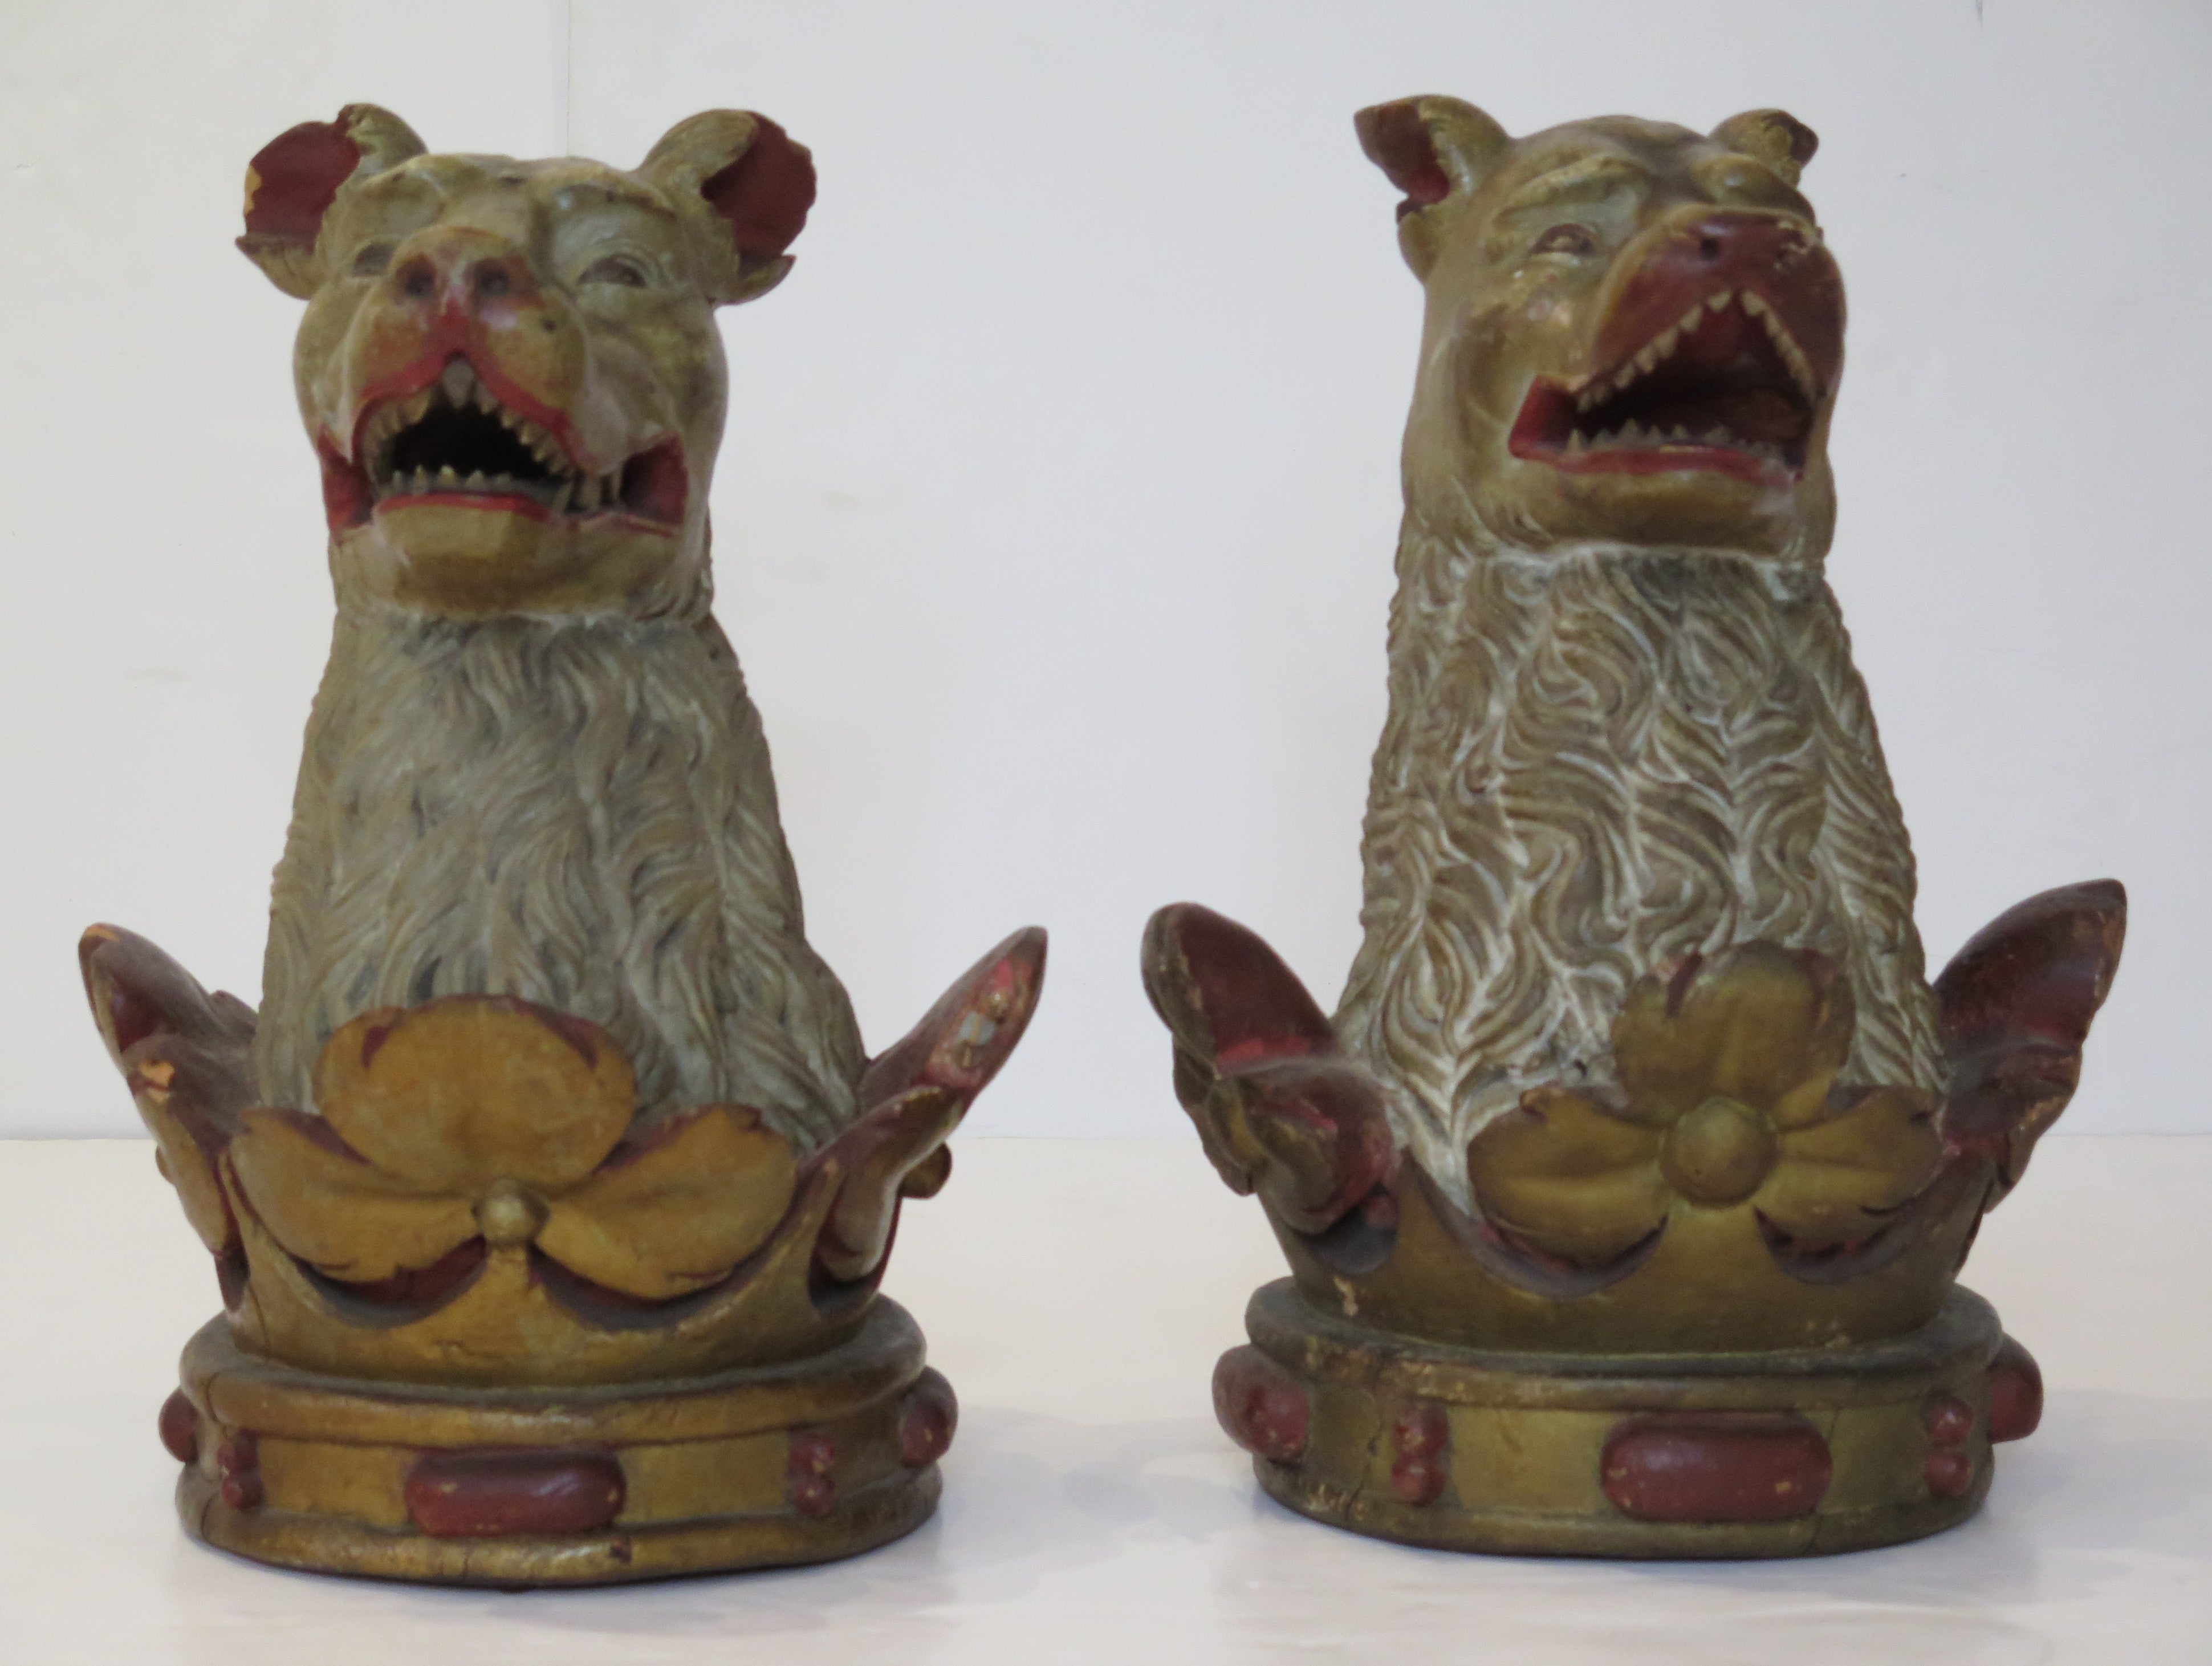 Carved Wood Armorial Crests / Bears or Wolves